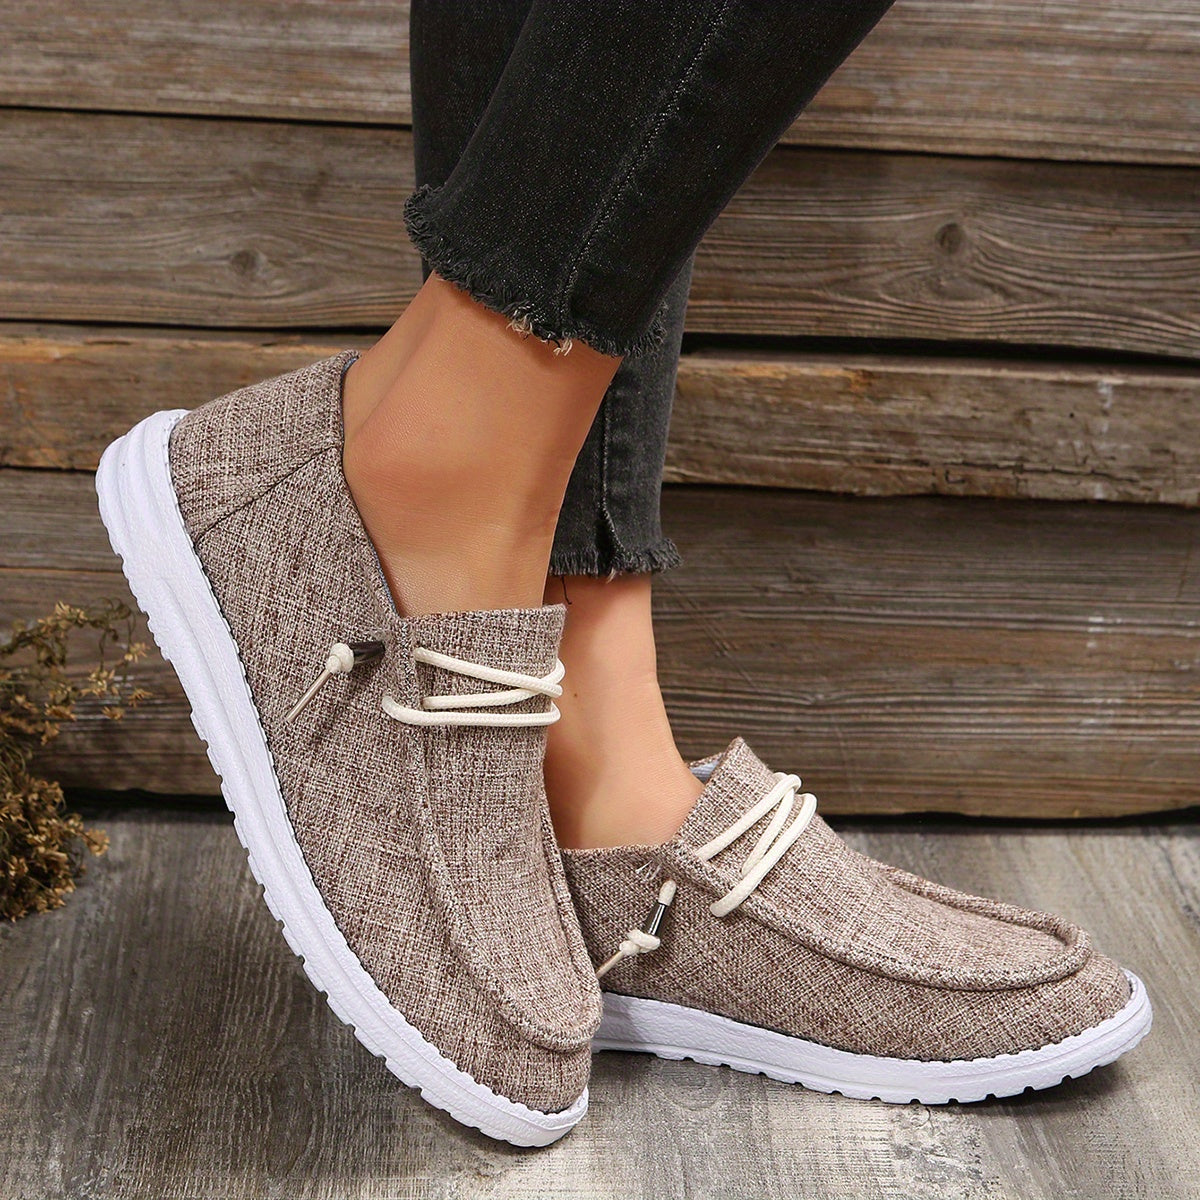 Women's Solid Color Flat Shoes, Slip On Low-top Round Toe Lightweight Canvas Shoes, Casual Outdoor Sporty Shoes